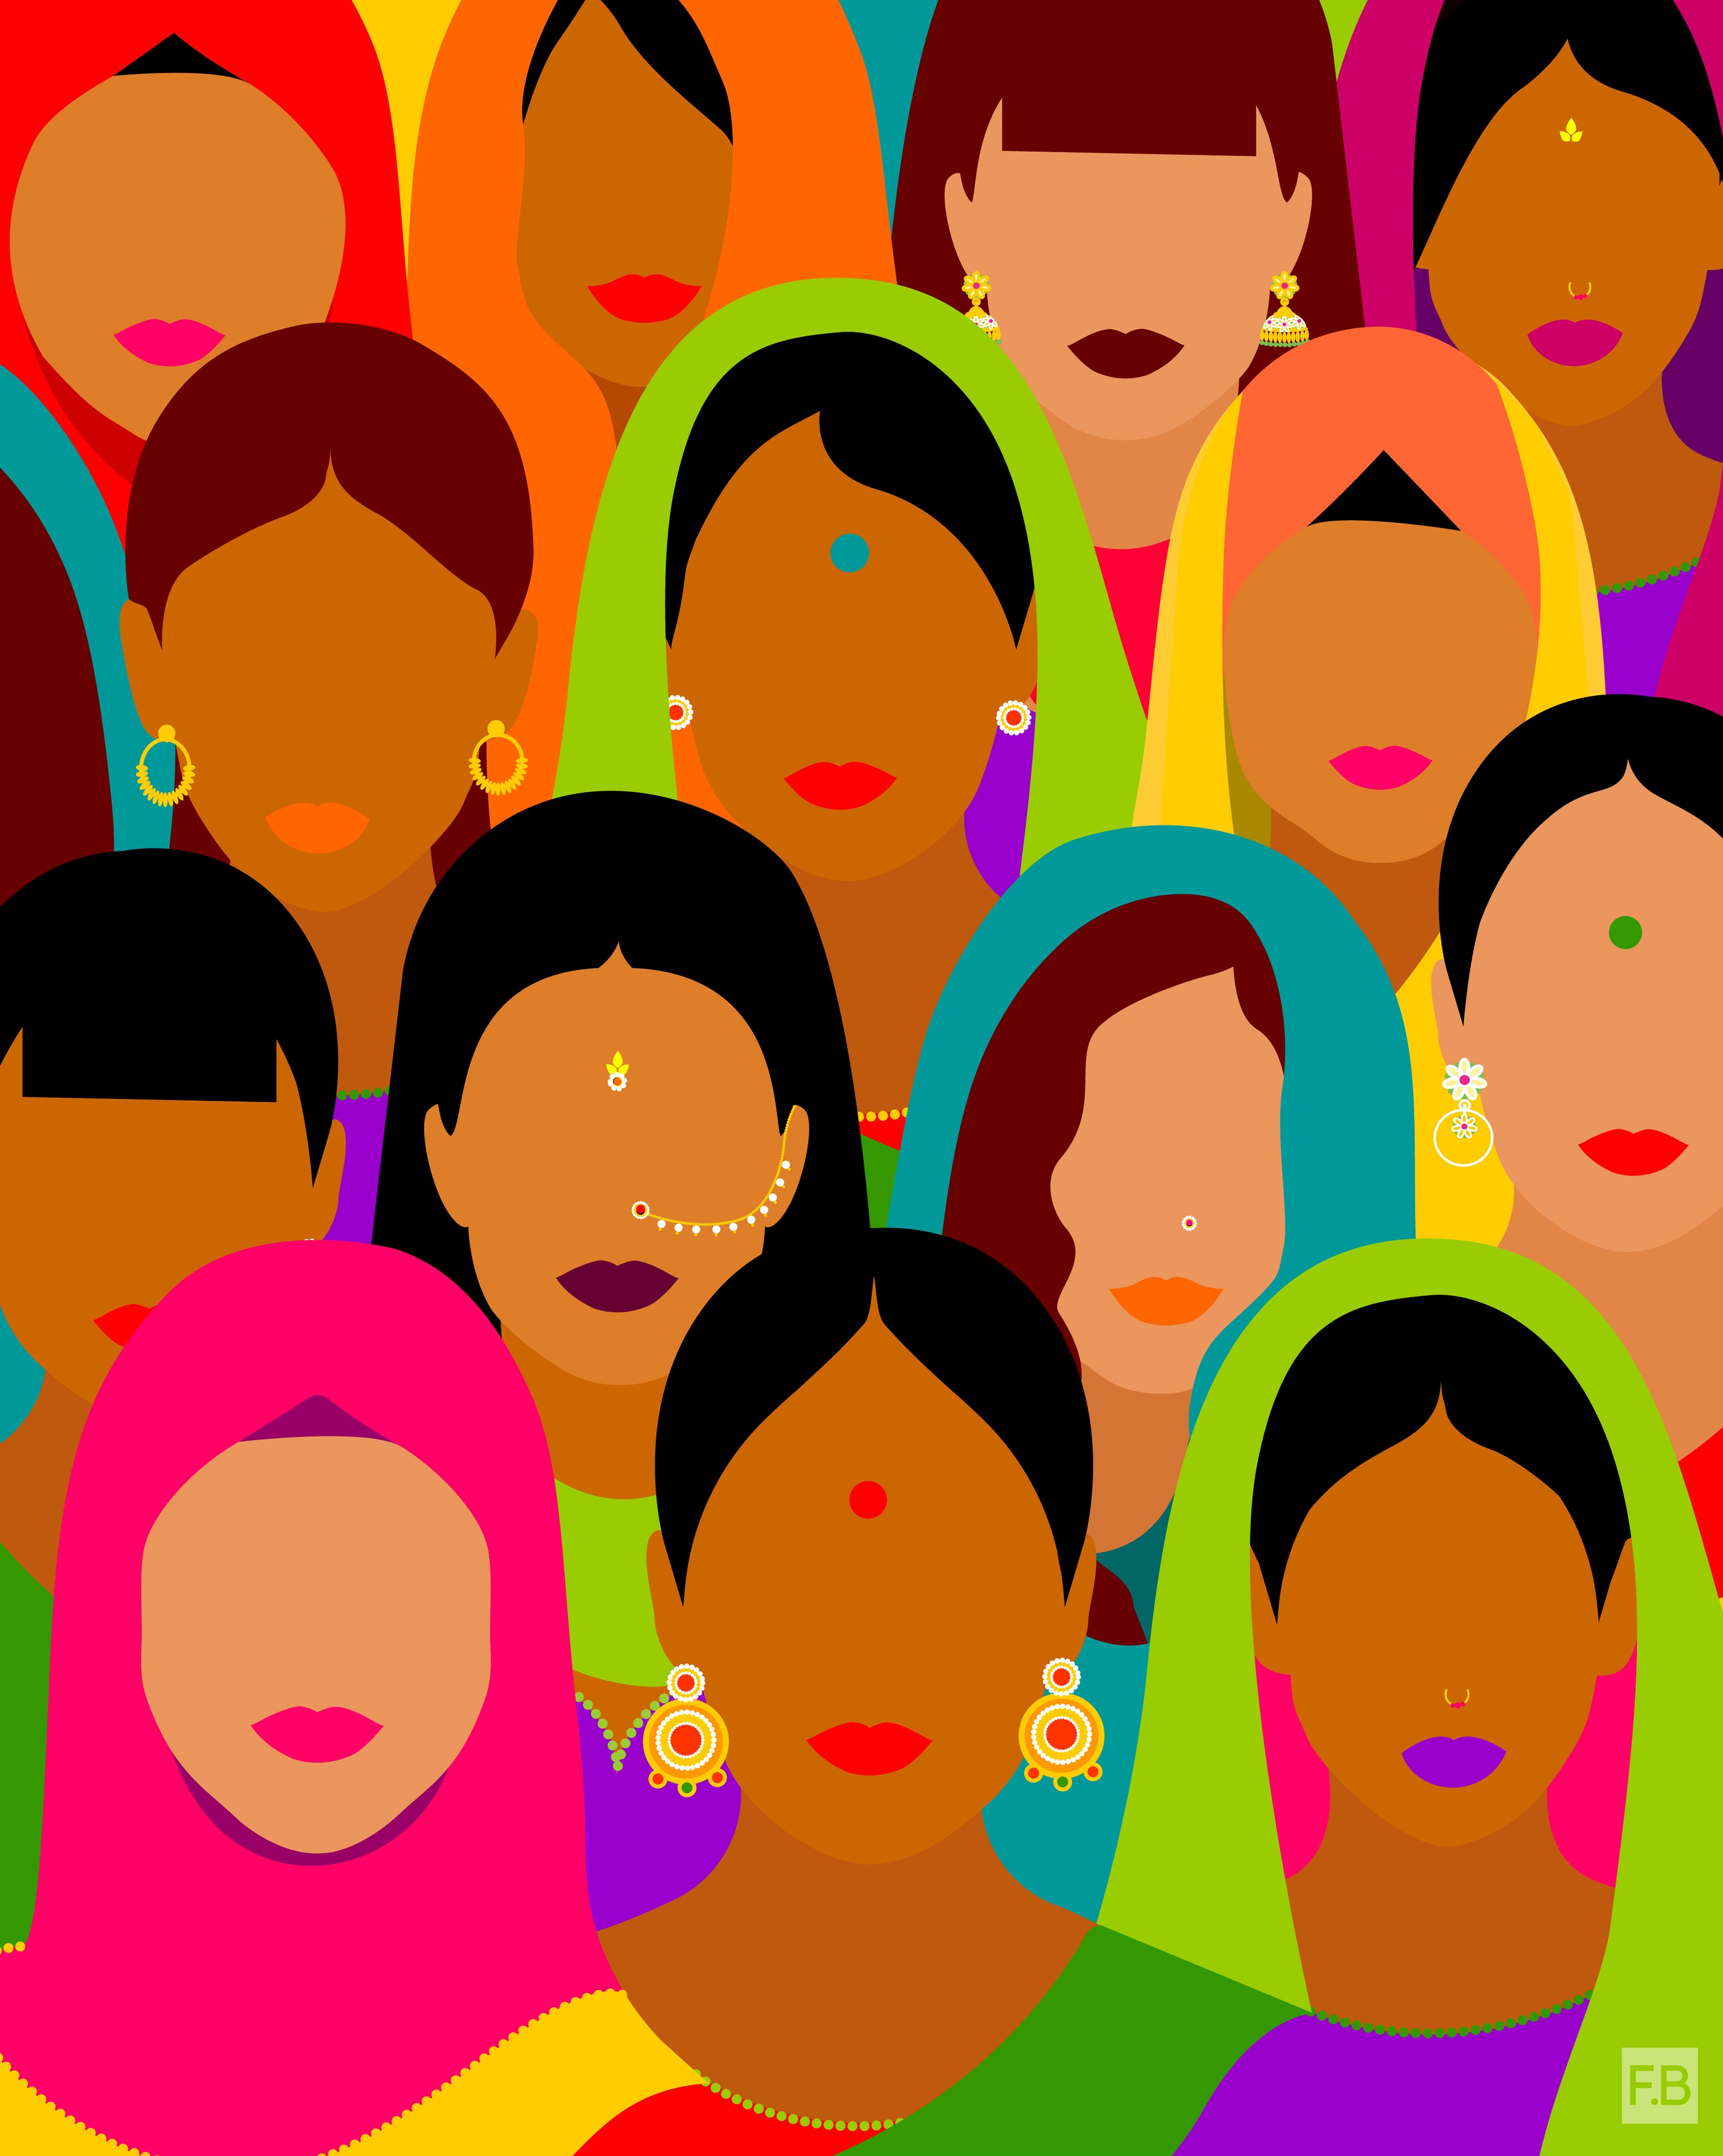 The beauty of diversity by Fatemah Baig